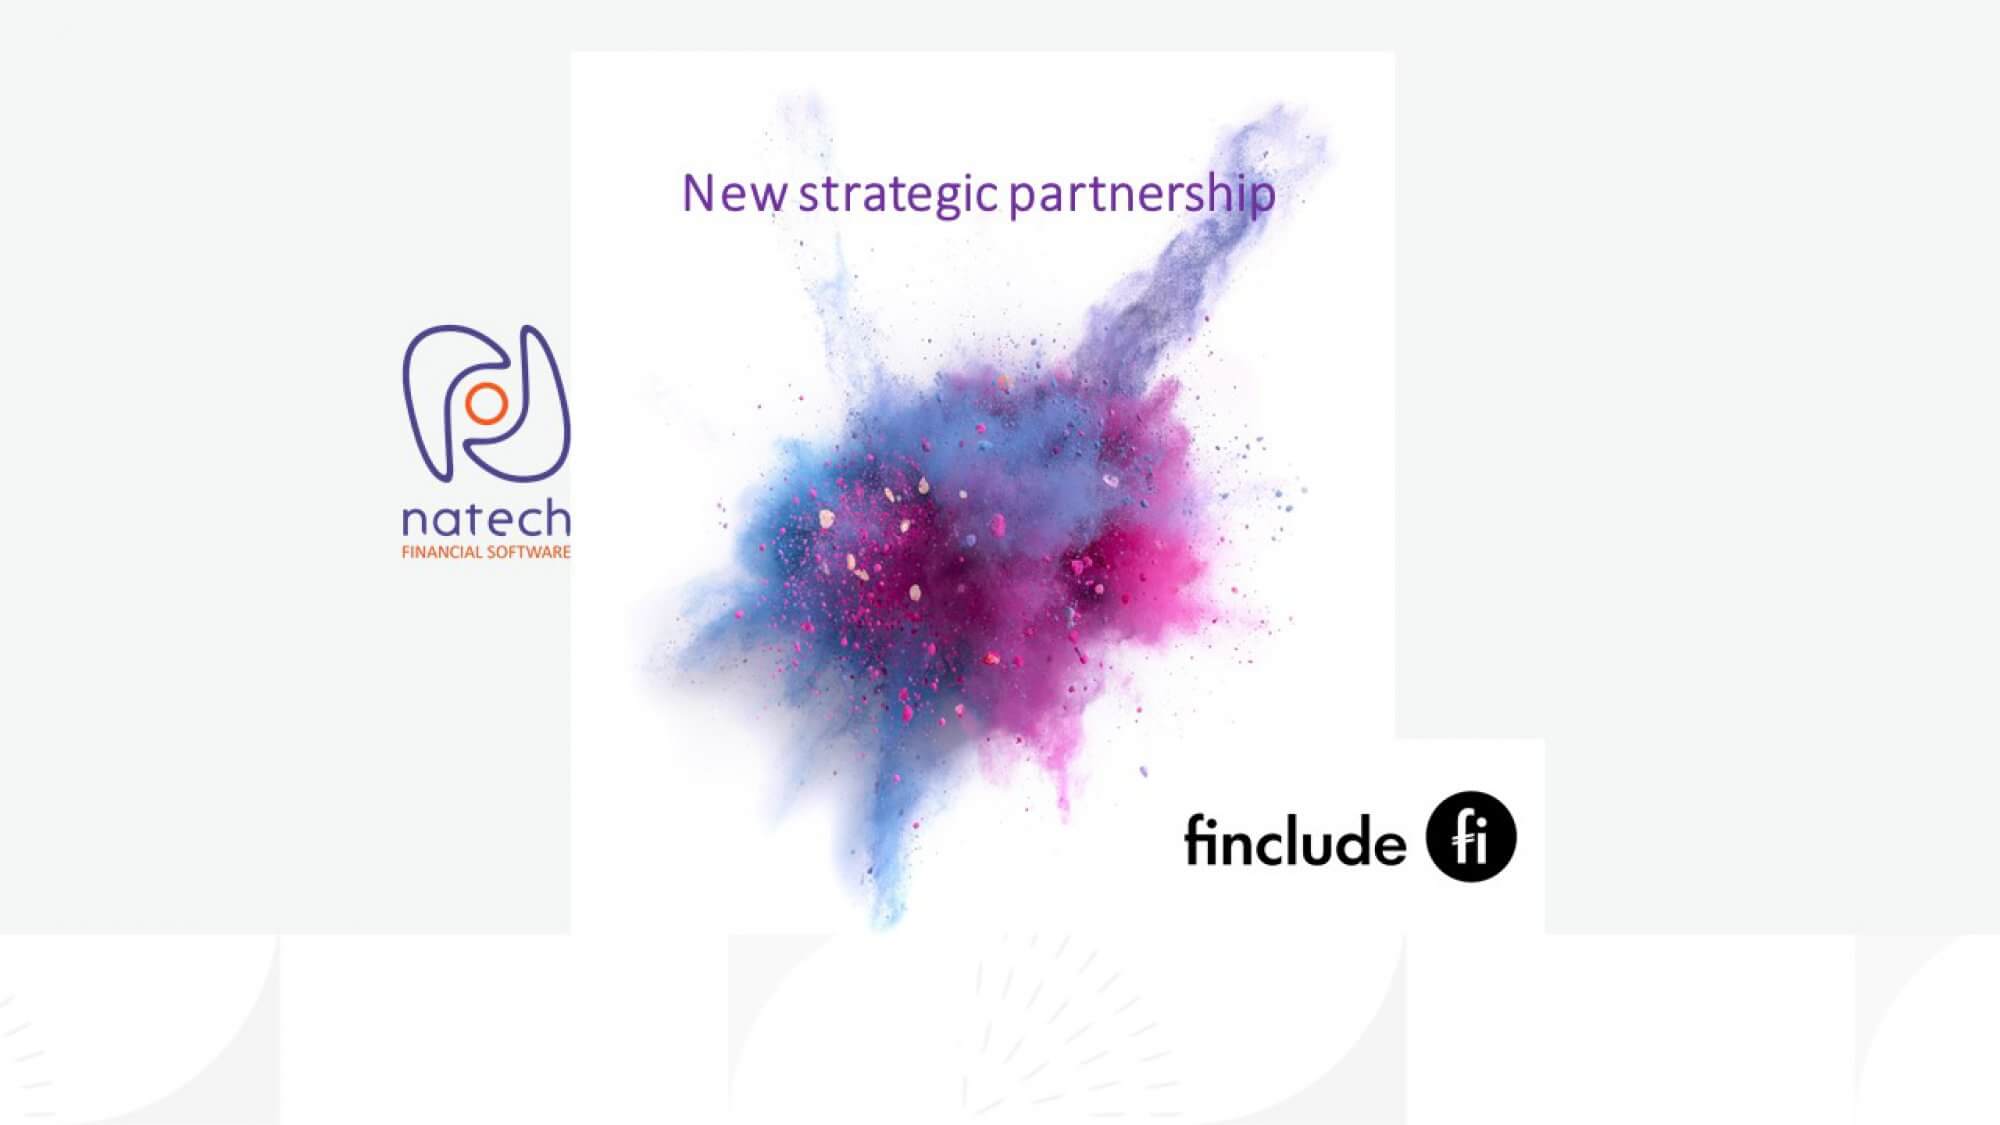 Natech news: The new strategic partnership between Natech and Finclude strengthens open banking in Greece and Europe